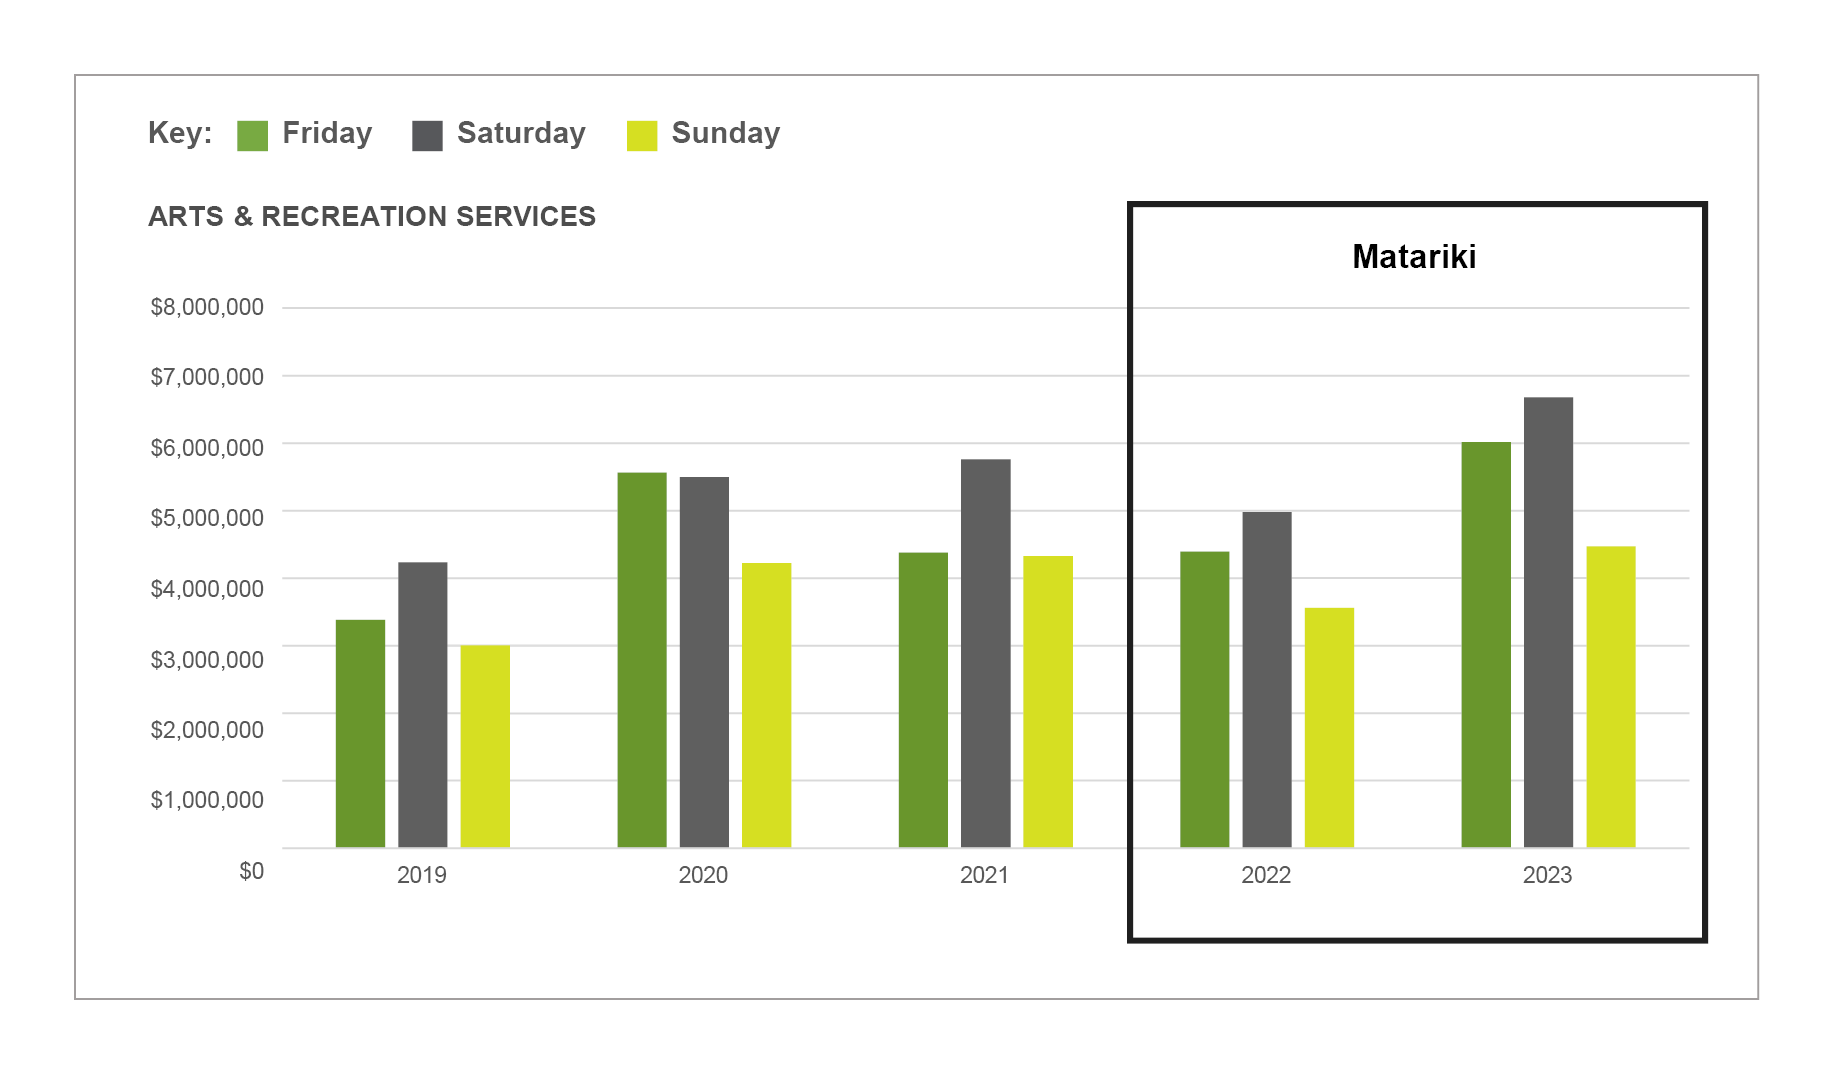 Bar graph showing the consumer spend over Matariki in the arts and recreation sector, there is a box around the  Matariki bars.